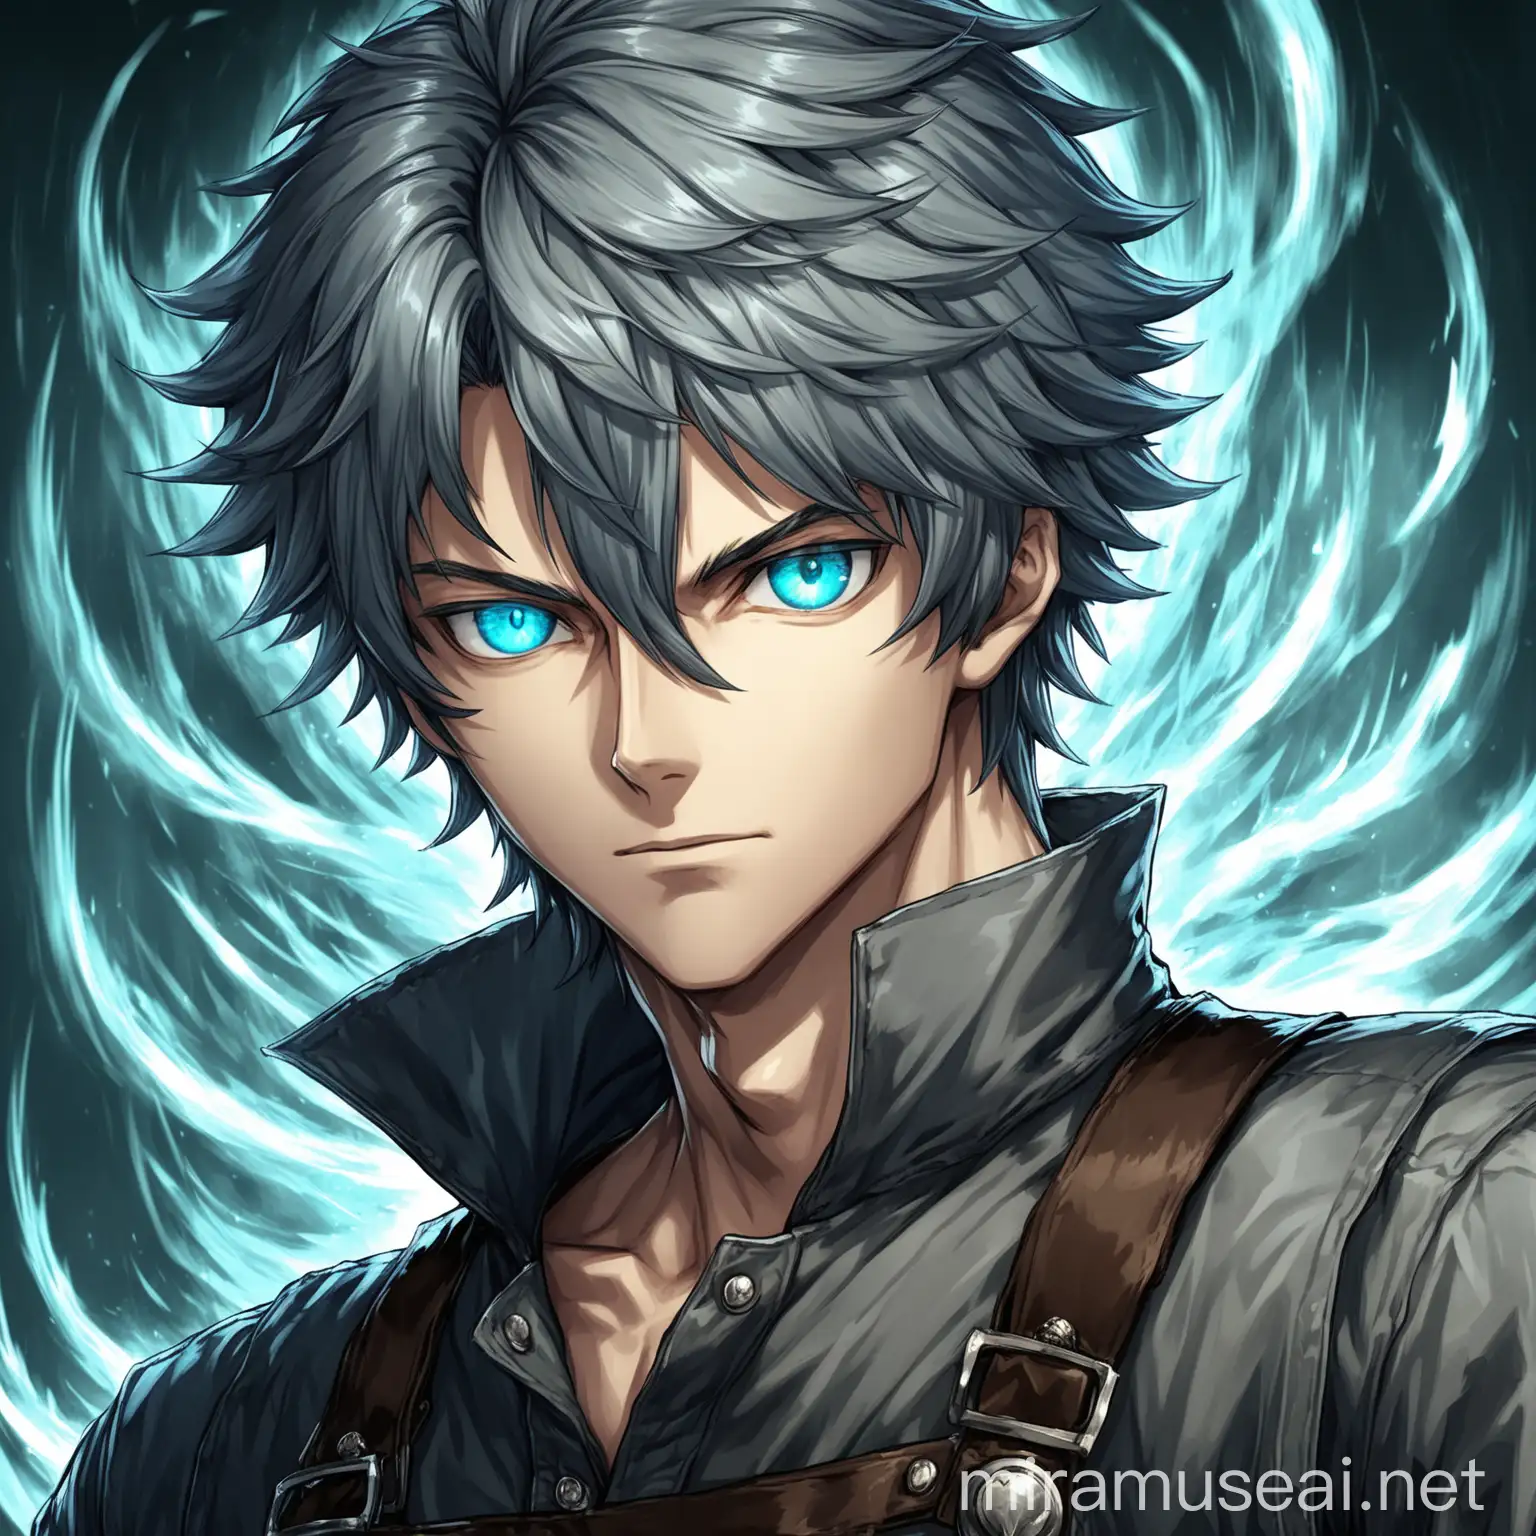 Overall,he is a charming Assassin character who has cyan eyes and gray comma hair, exuding an aura of mystery, danger and undeniable skill. His striking appearance, sharp wit, and unwavering loyalty make him a compelling figure who is sure to catch the eye of any Midjourney creation.